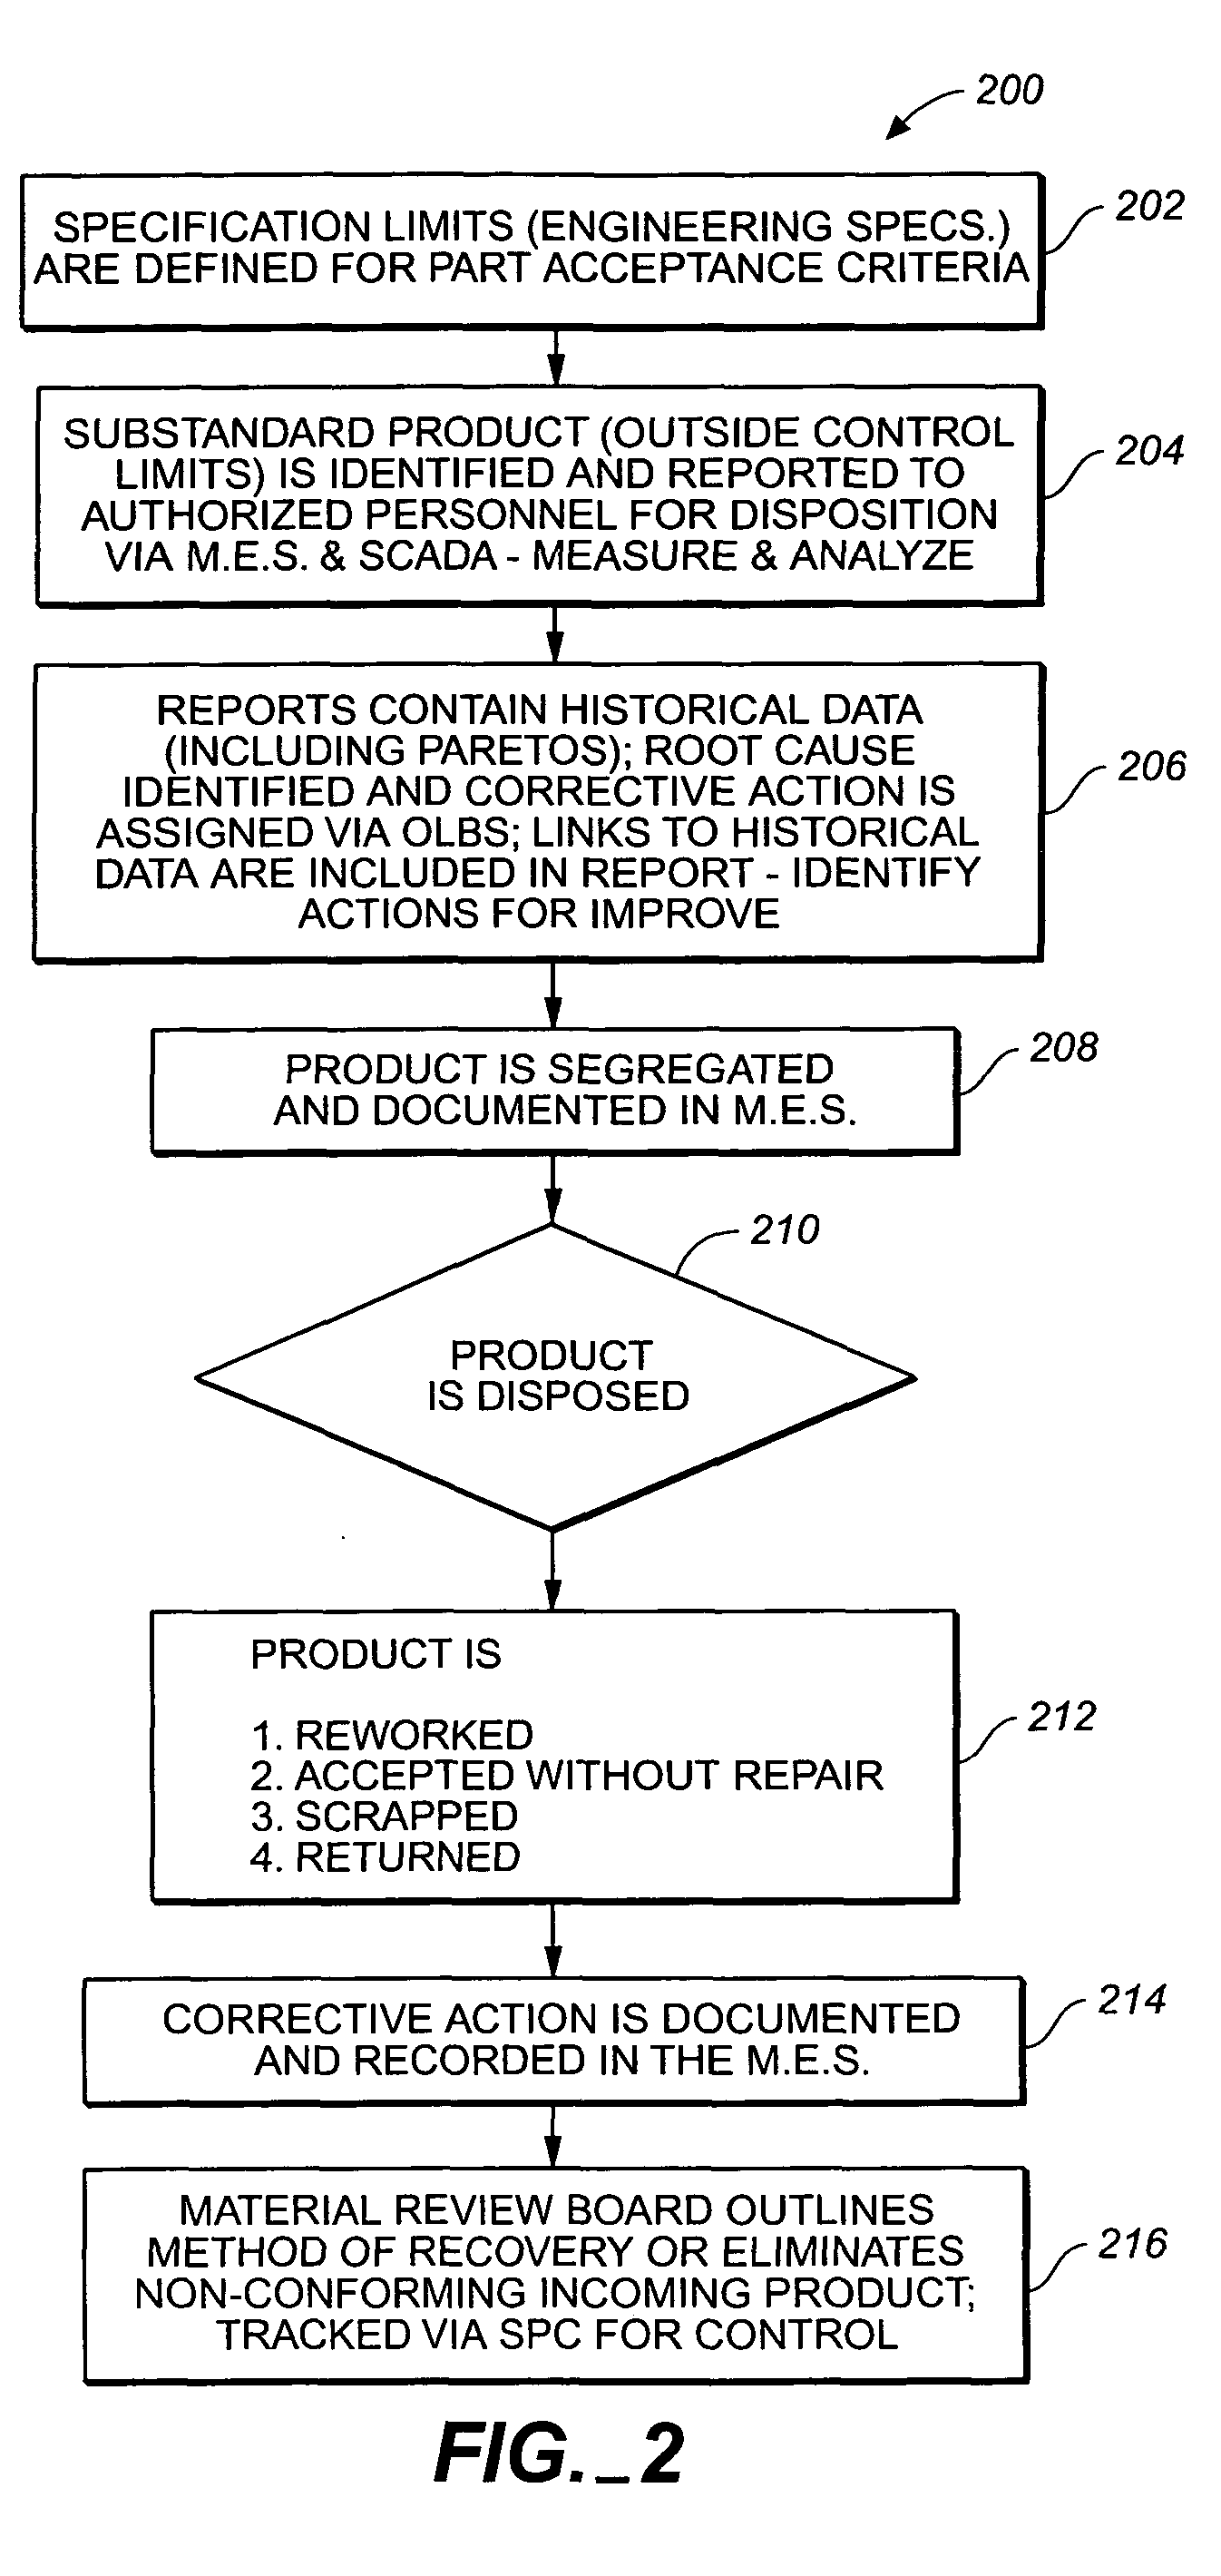 Method and apparatus for integrating Six Sigma methodology into inspection receiving process of outsourced subassemblies, parts, and materials: acceptance, rejection, trending, tracking and closed loop corrective action